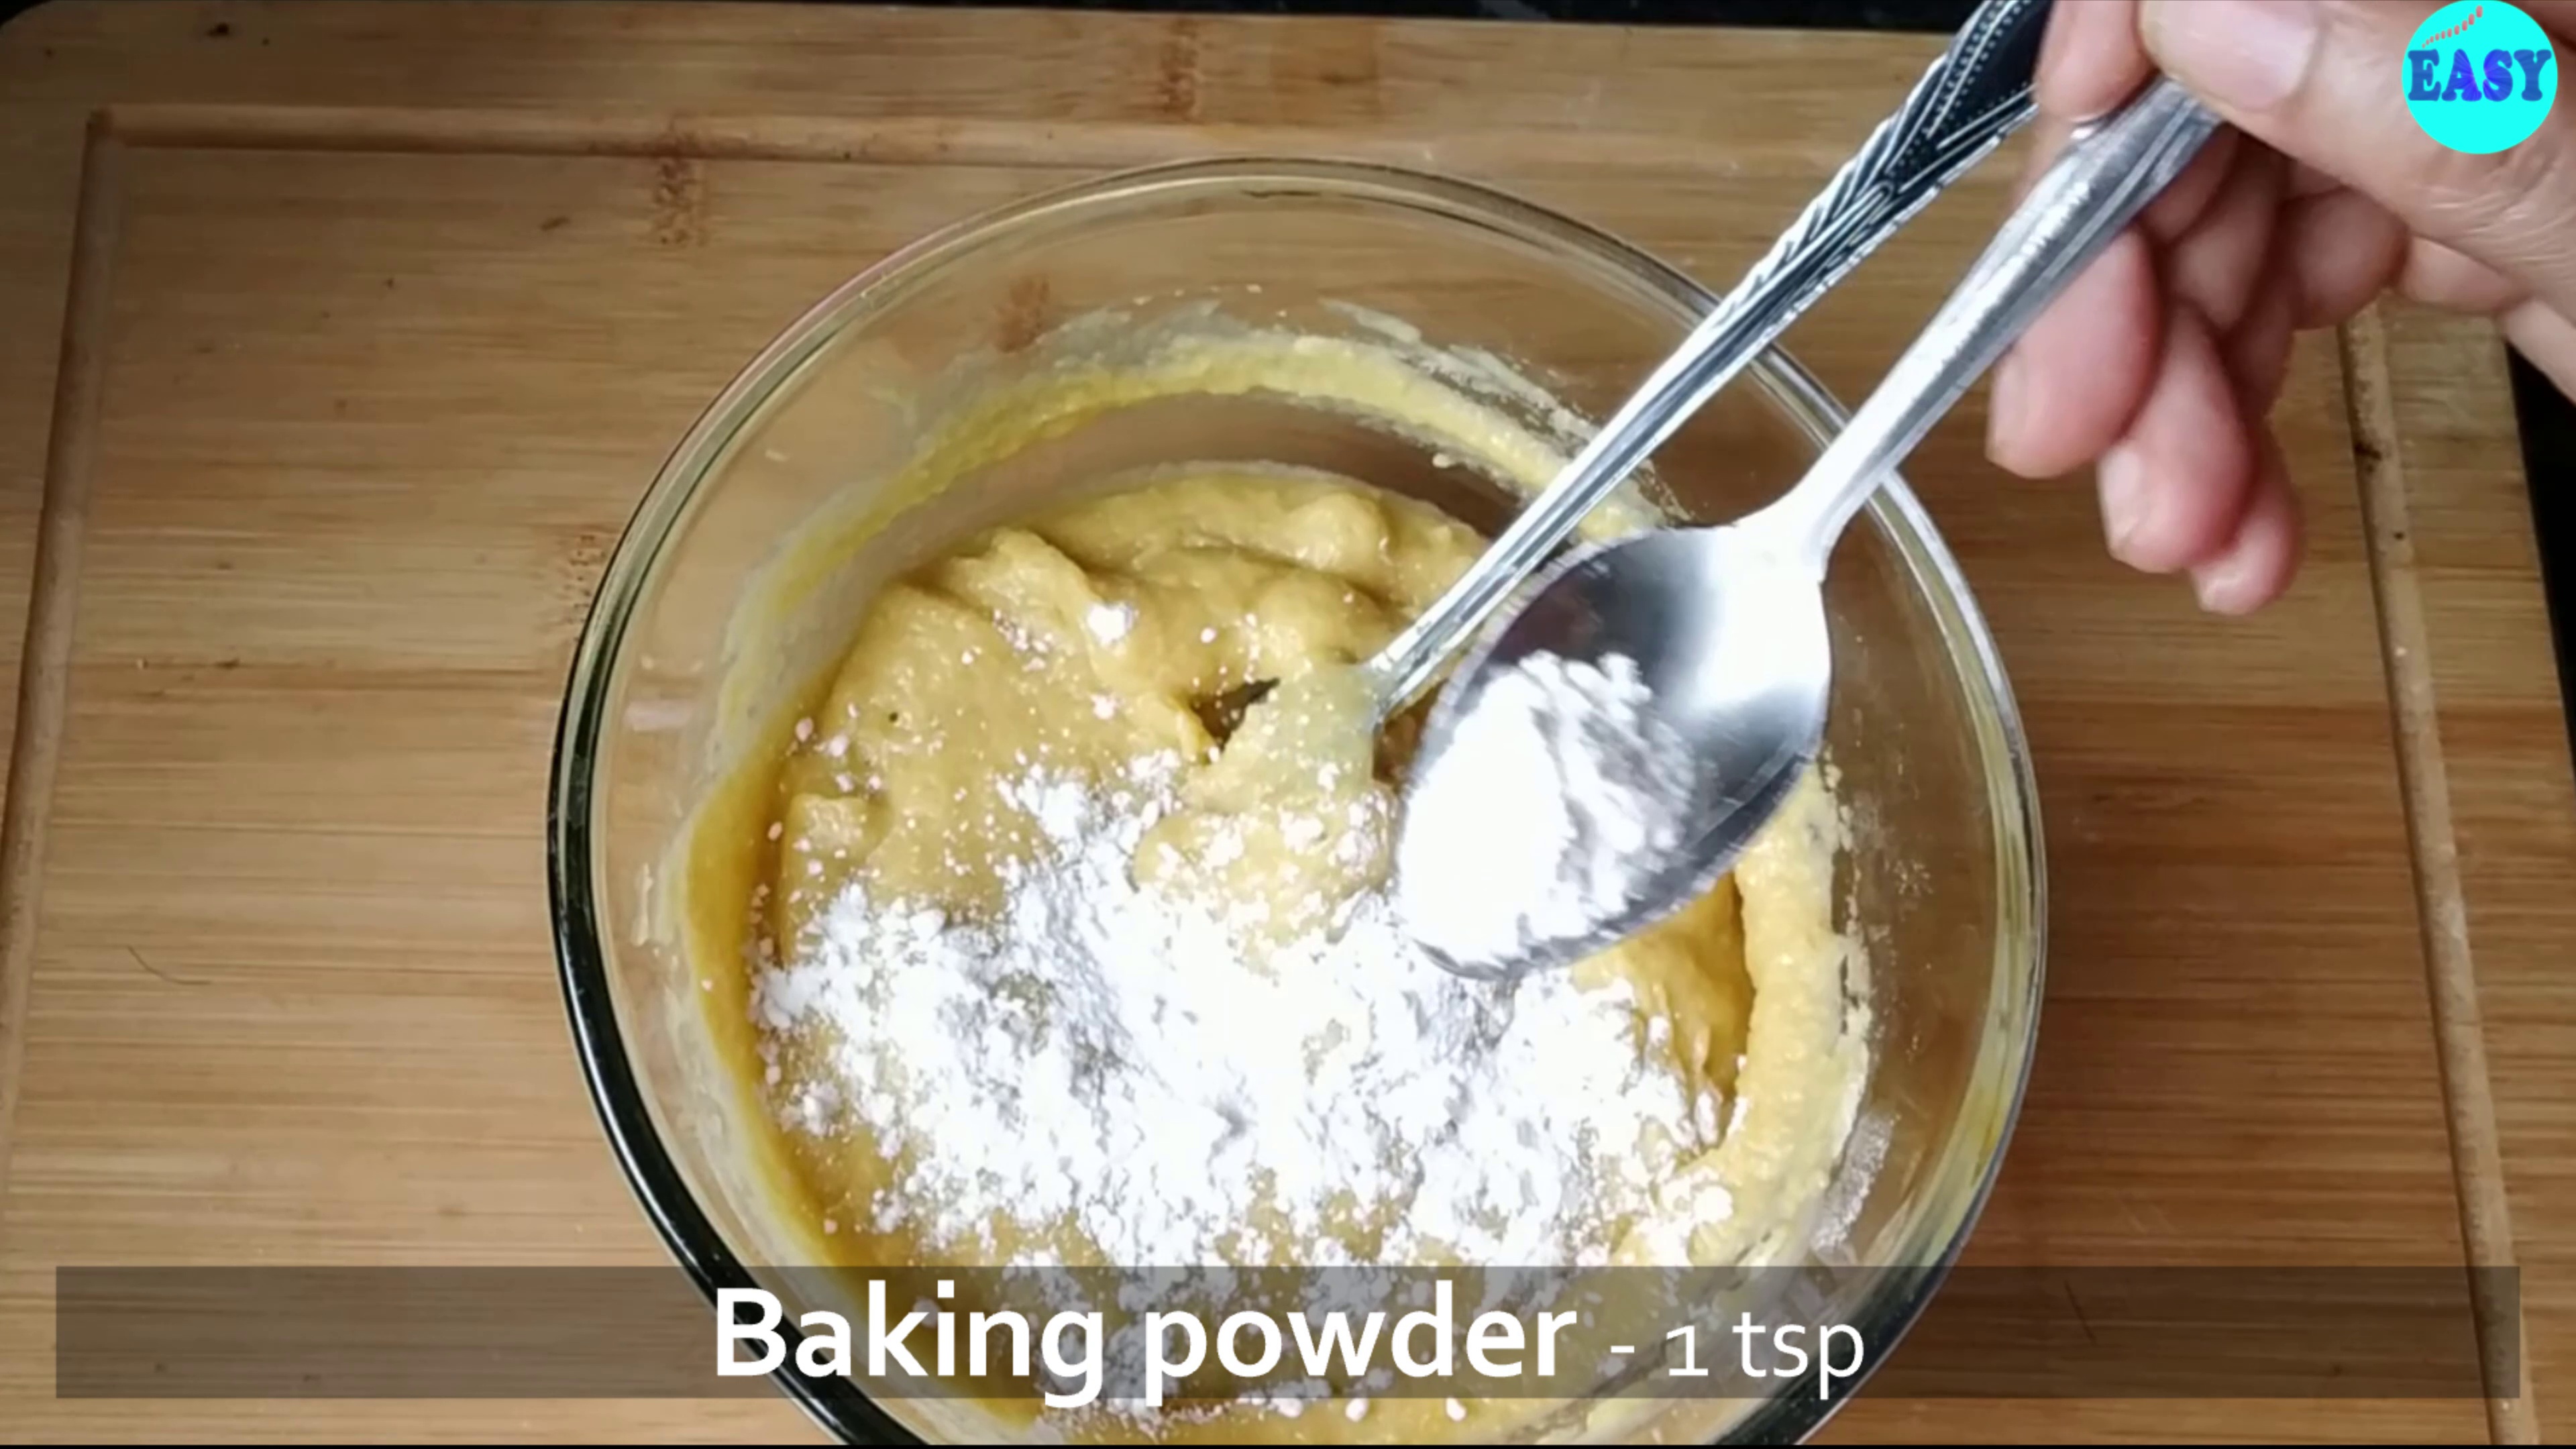 Step 5 - Now add baking powder, baking soda and curd to the mixtures and mix everything well. Add more milk if needed to adjust the consistency.